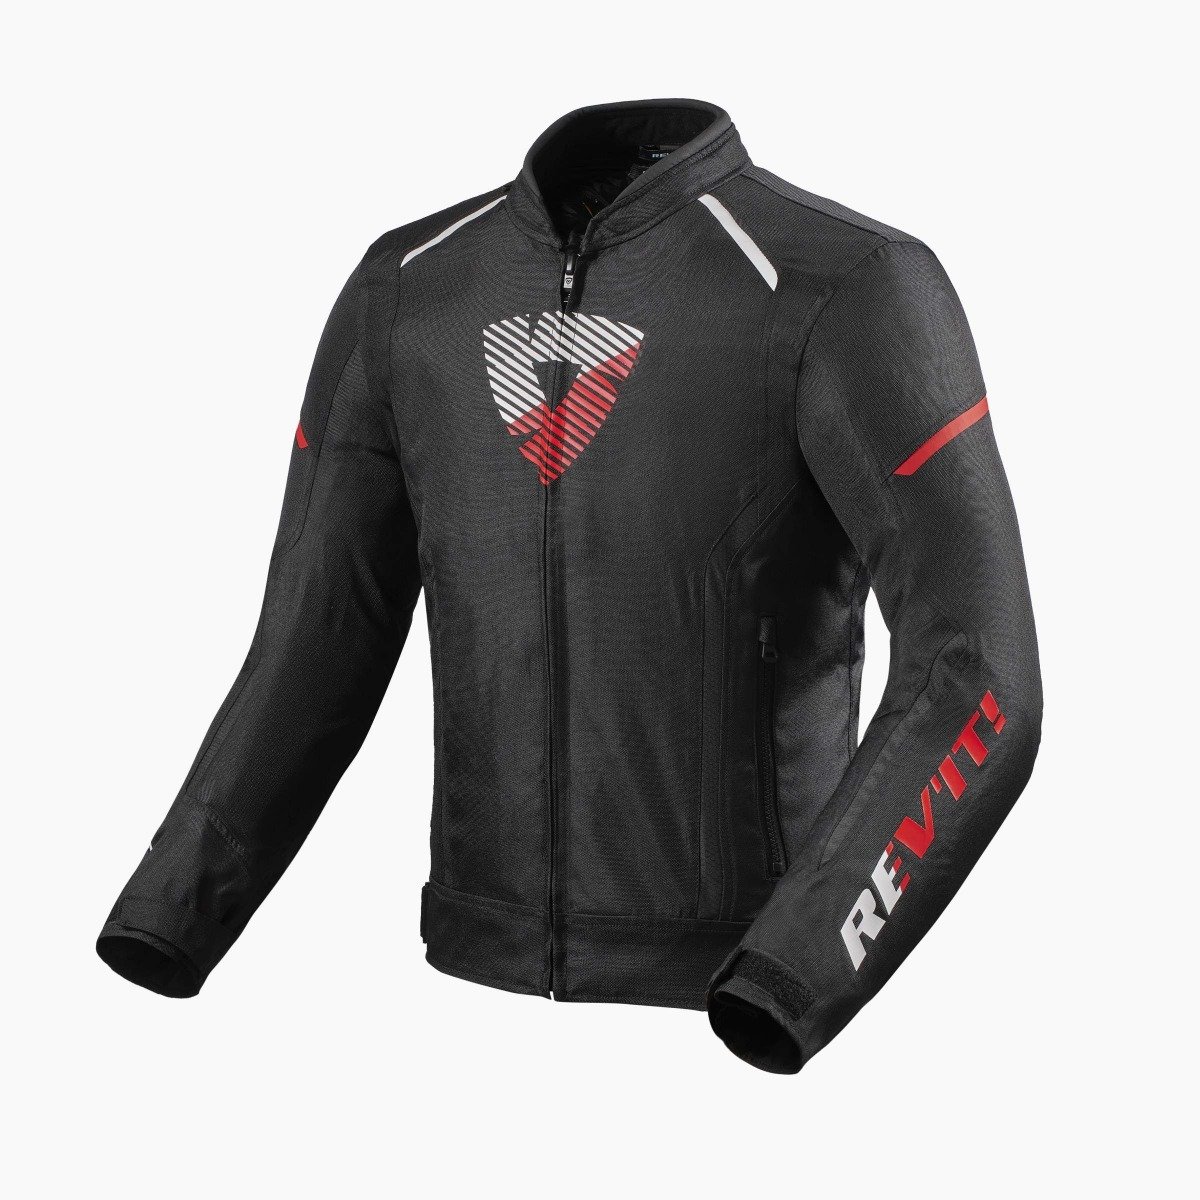 Image of REV'IT! Sprint H2O Jacket Black Neon Red Size XL ID 8700001311830